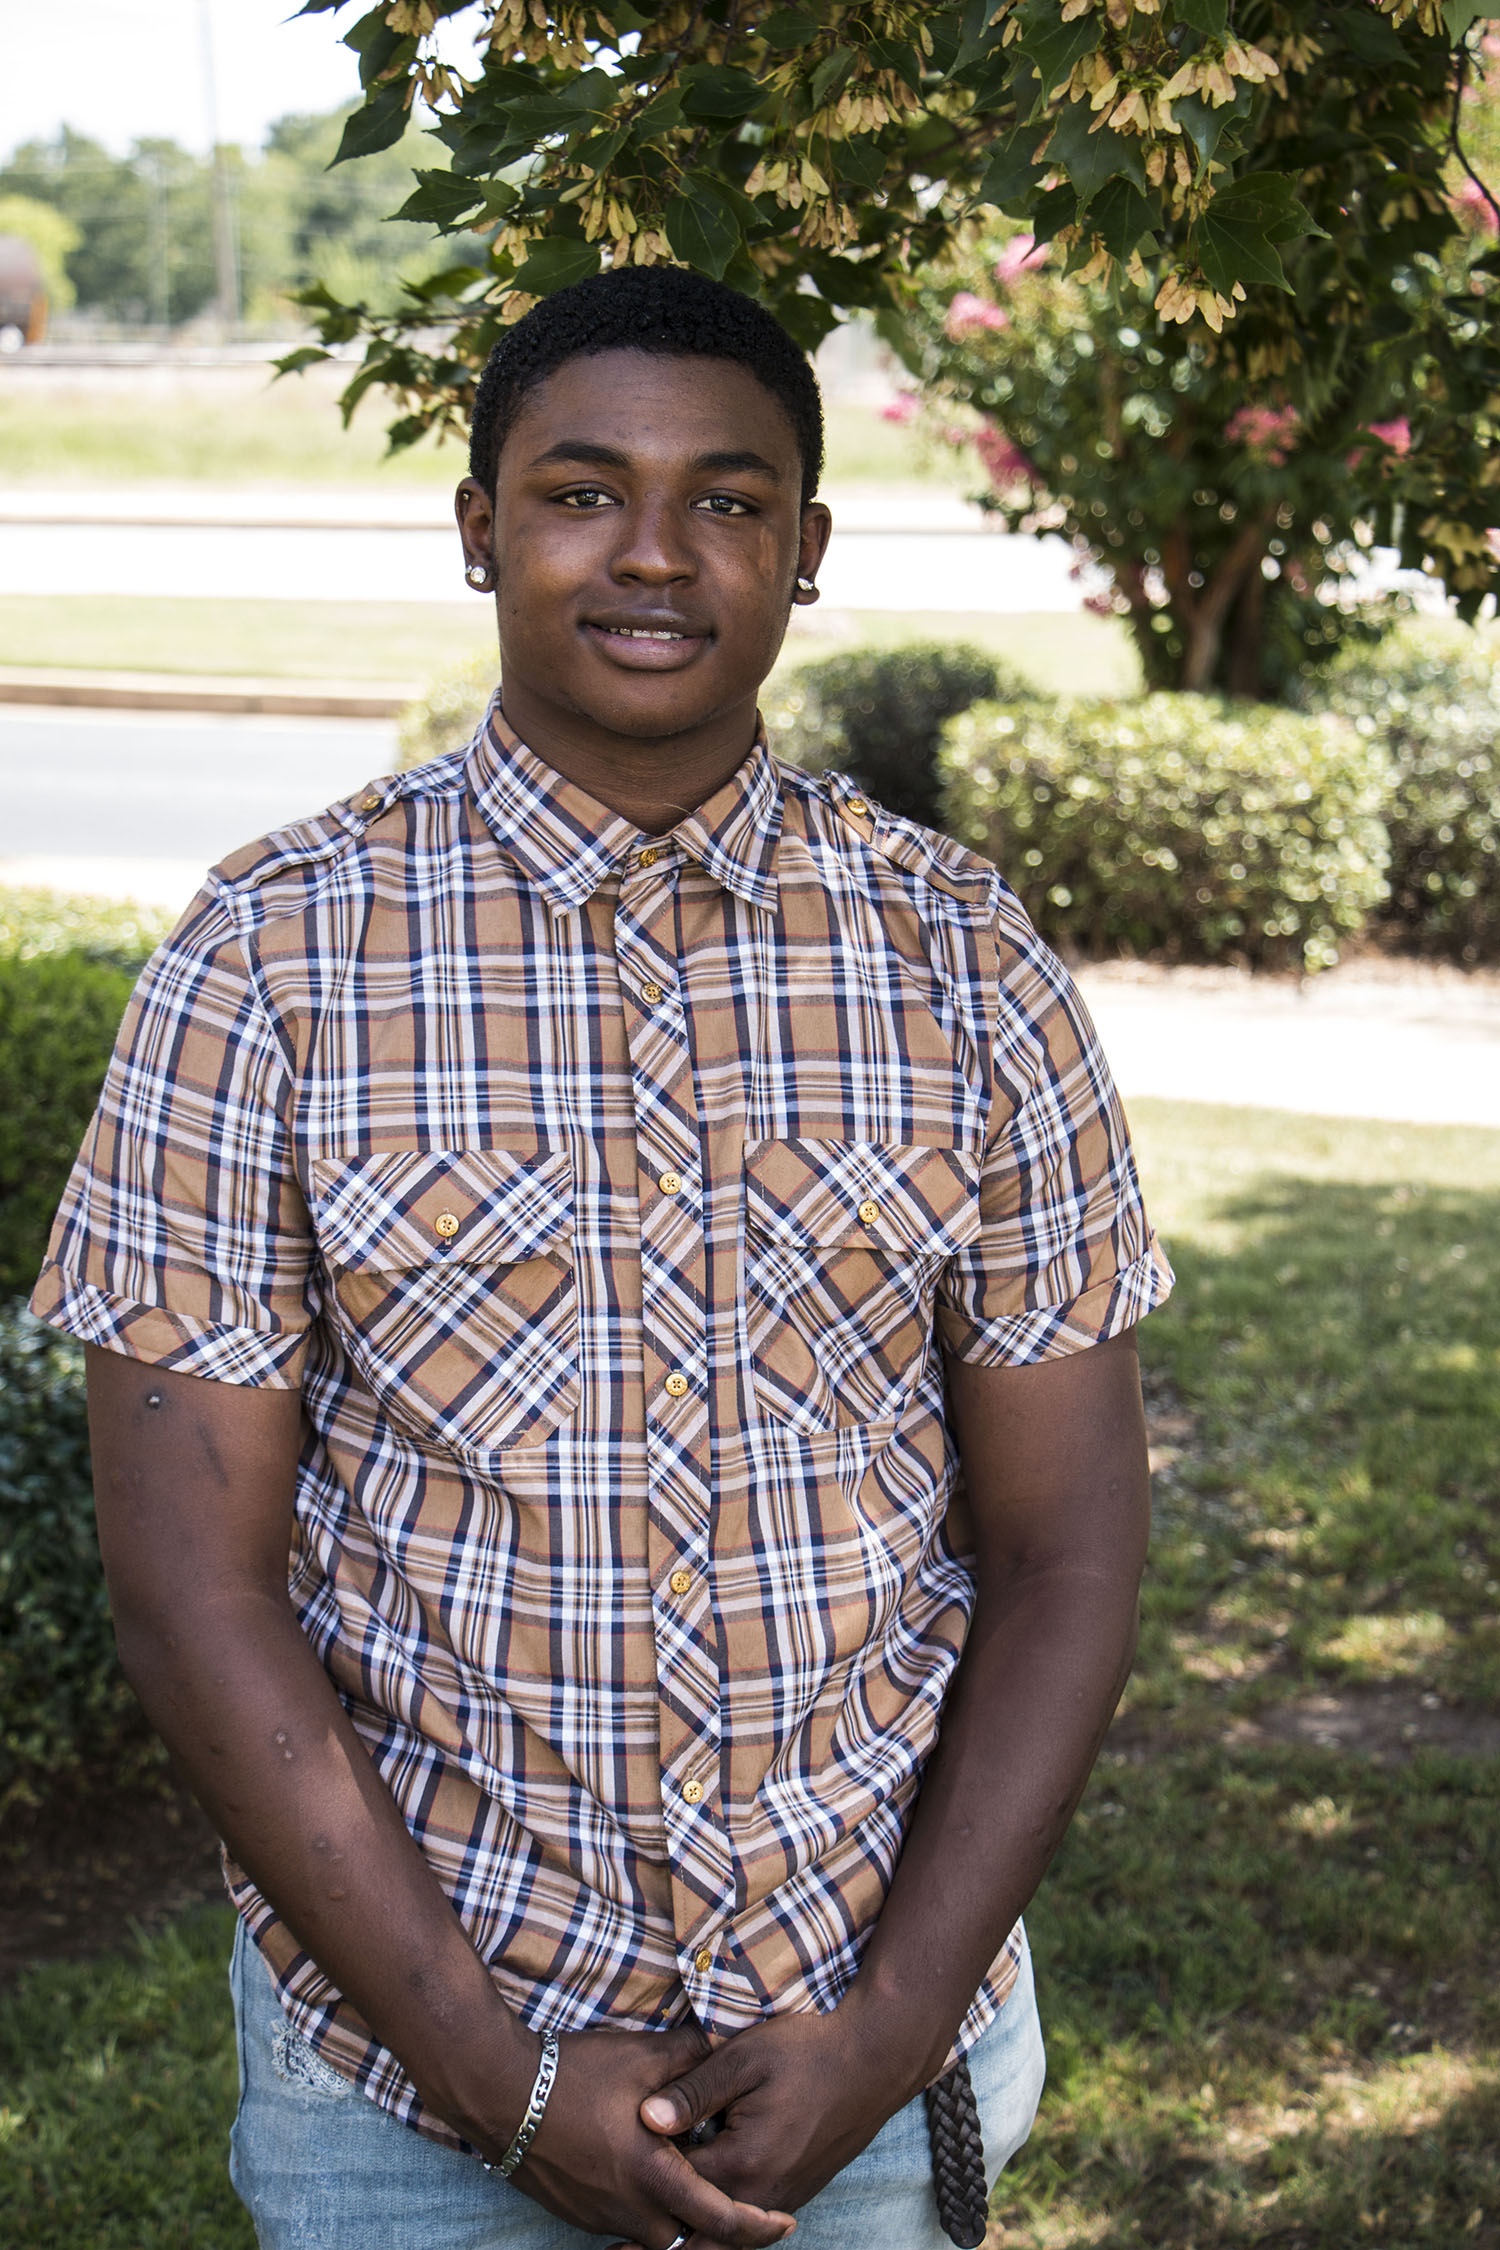 Malik Taylor is one of four graduates of Peach County High School who received the Claybon J. Edwards Memorial Scholarship to attend CGTC this fall. 